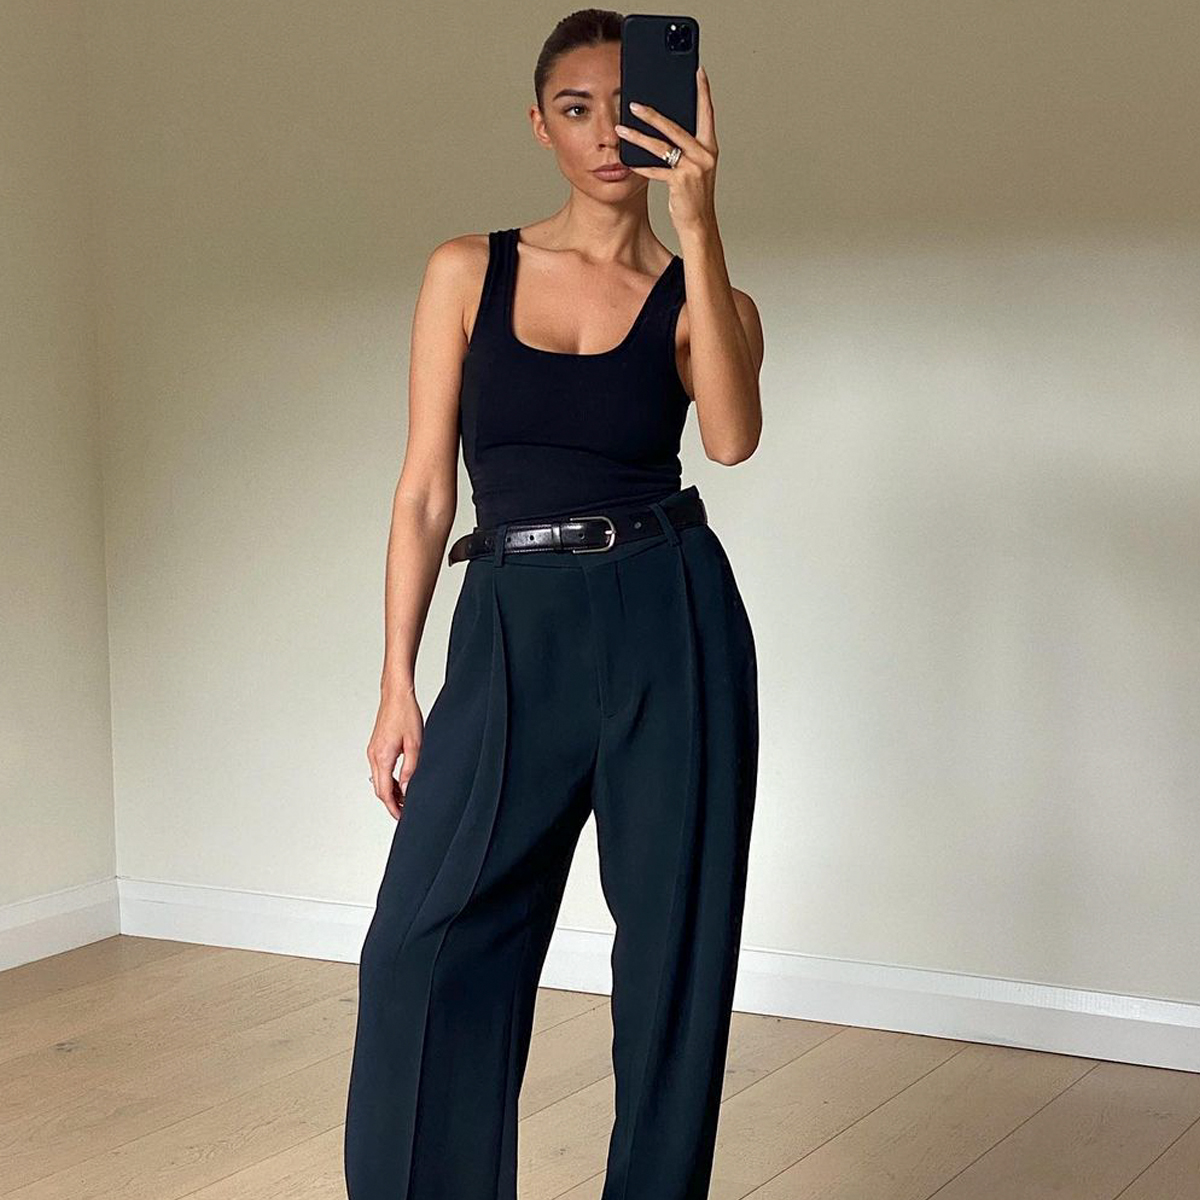 How to Style Baggy Pants for Women Like the Fashion Crowd | Who What Wear